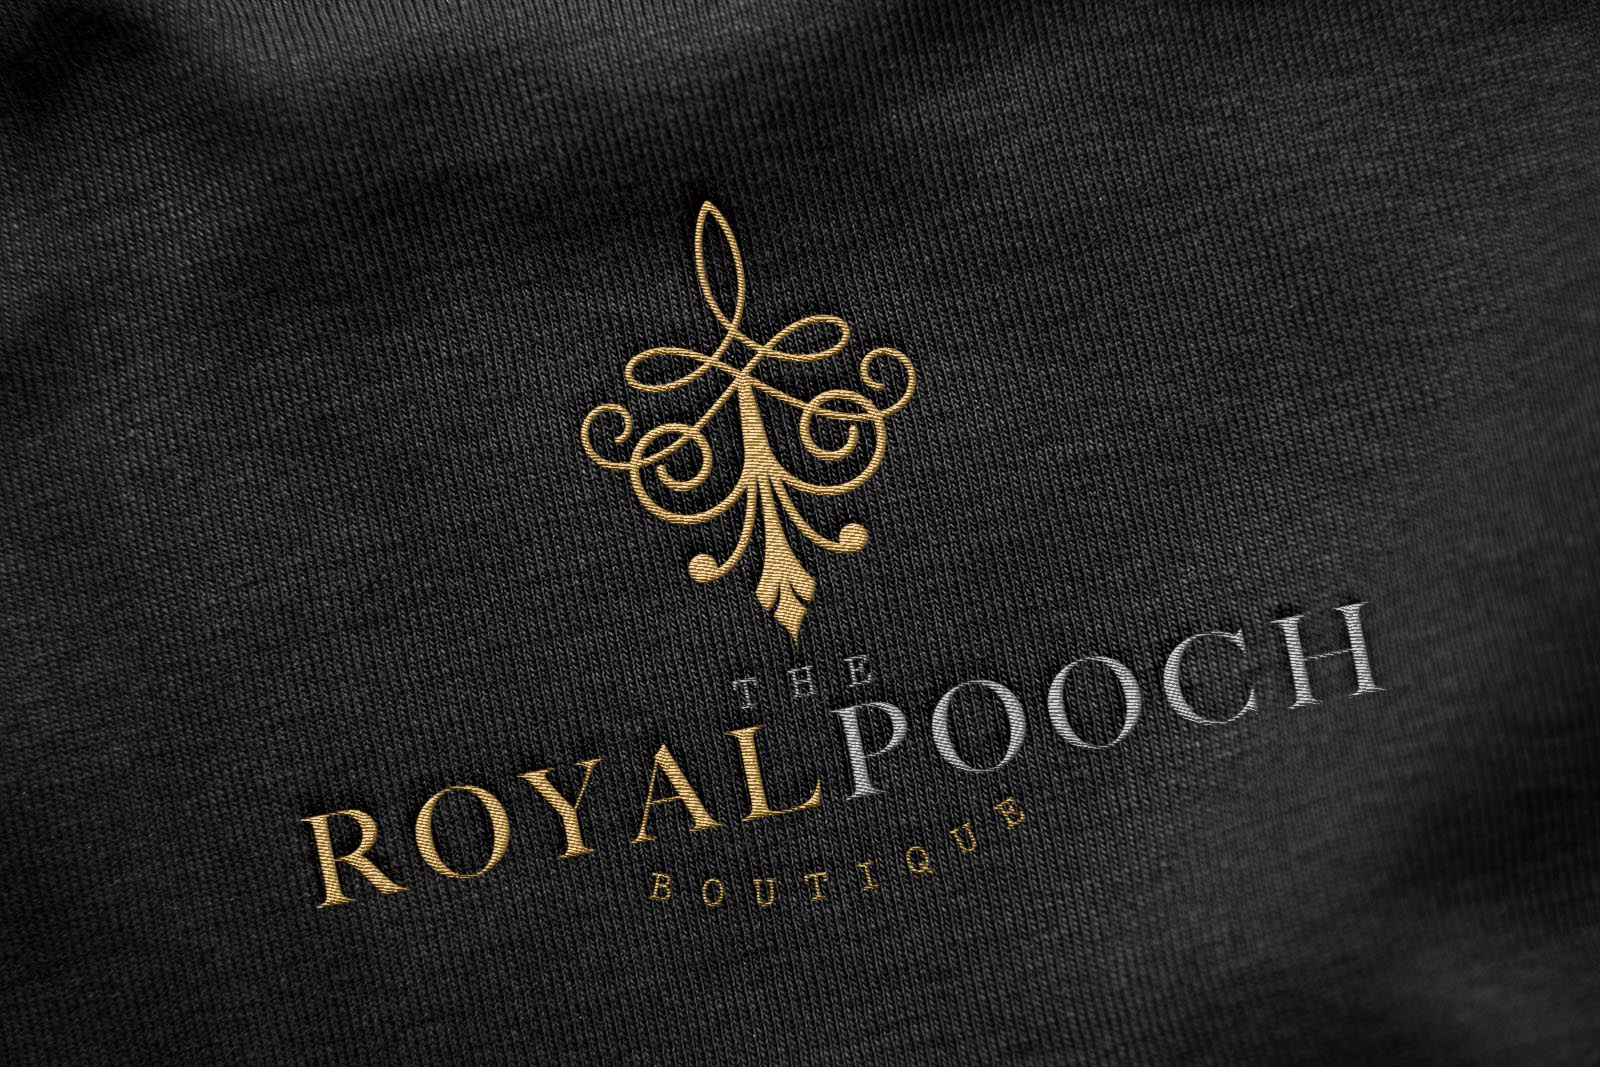 Royal Pooch Boutique Branding and Identity Design Project